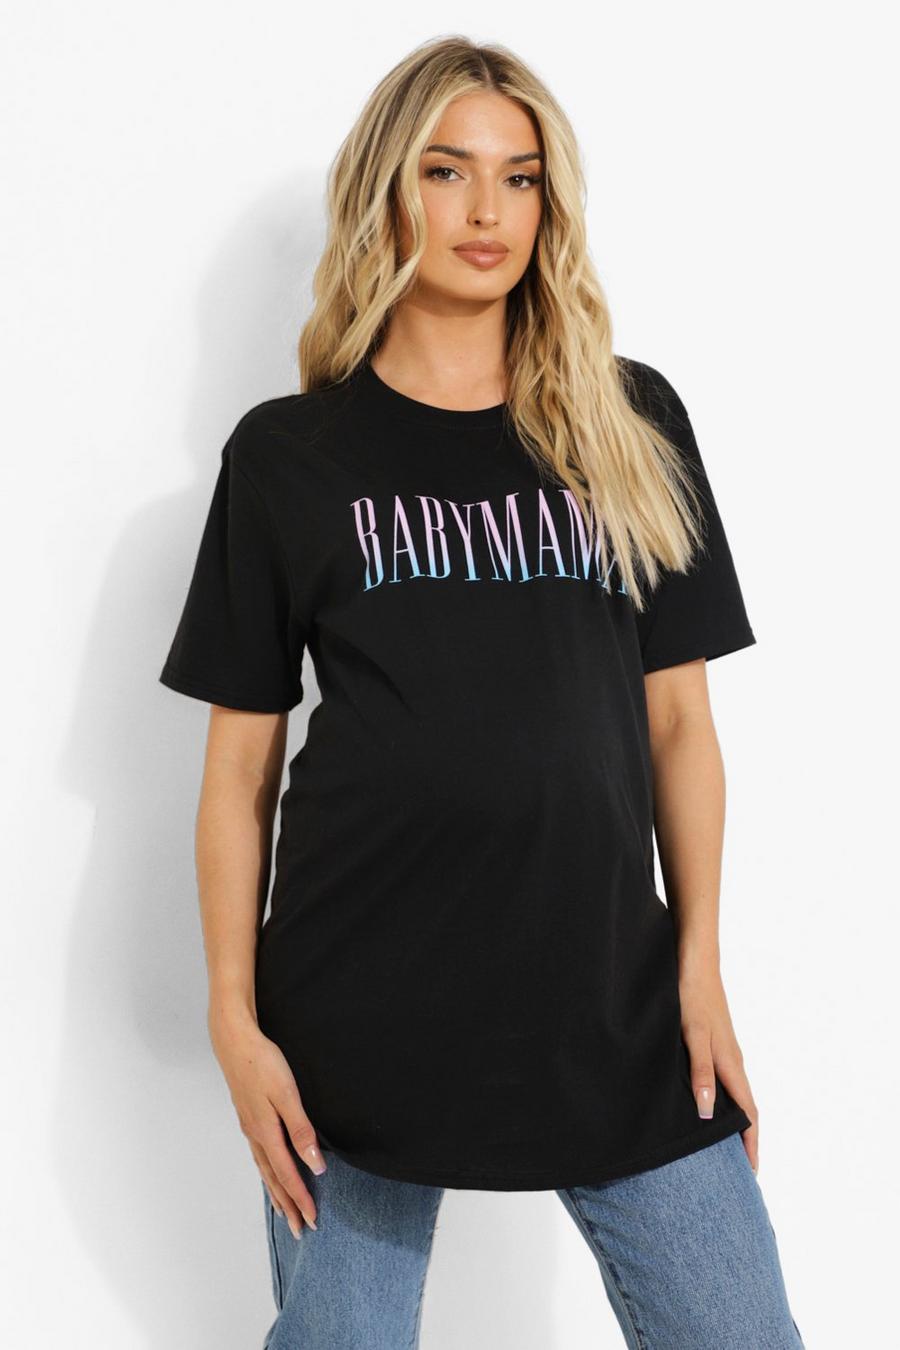 T-Shirt Premaman in stile Varsity con stampa "Baby Mama", Black image number 1